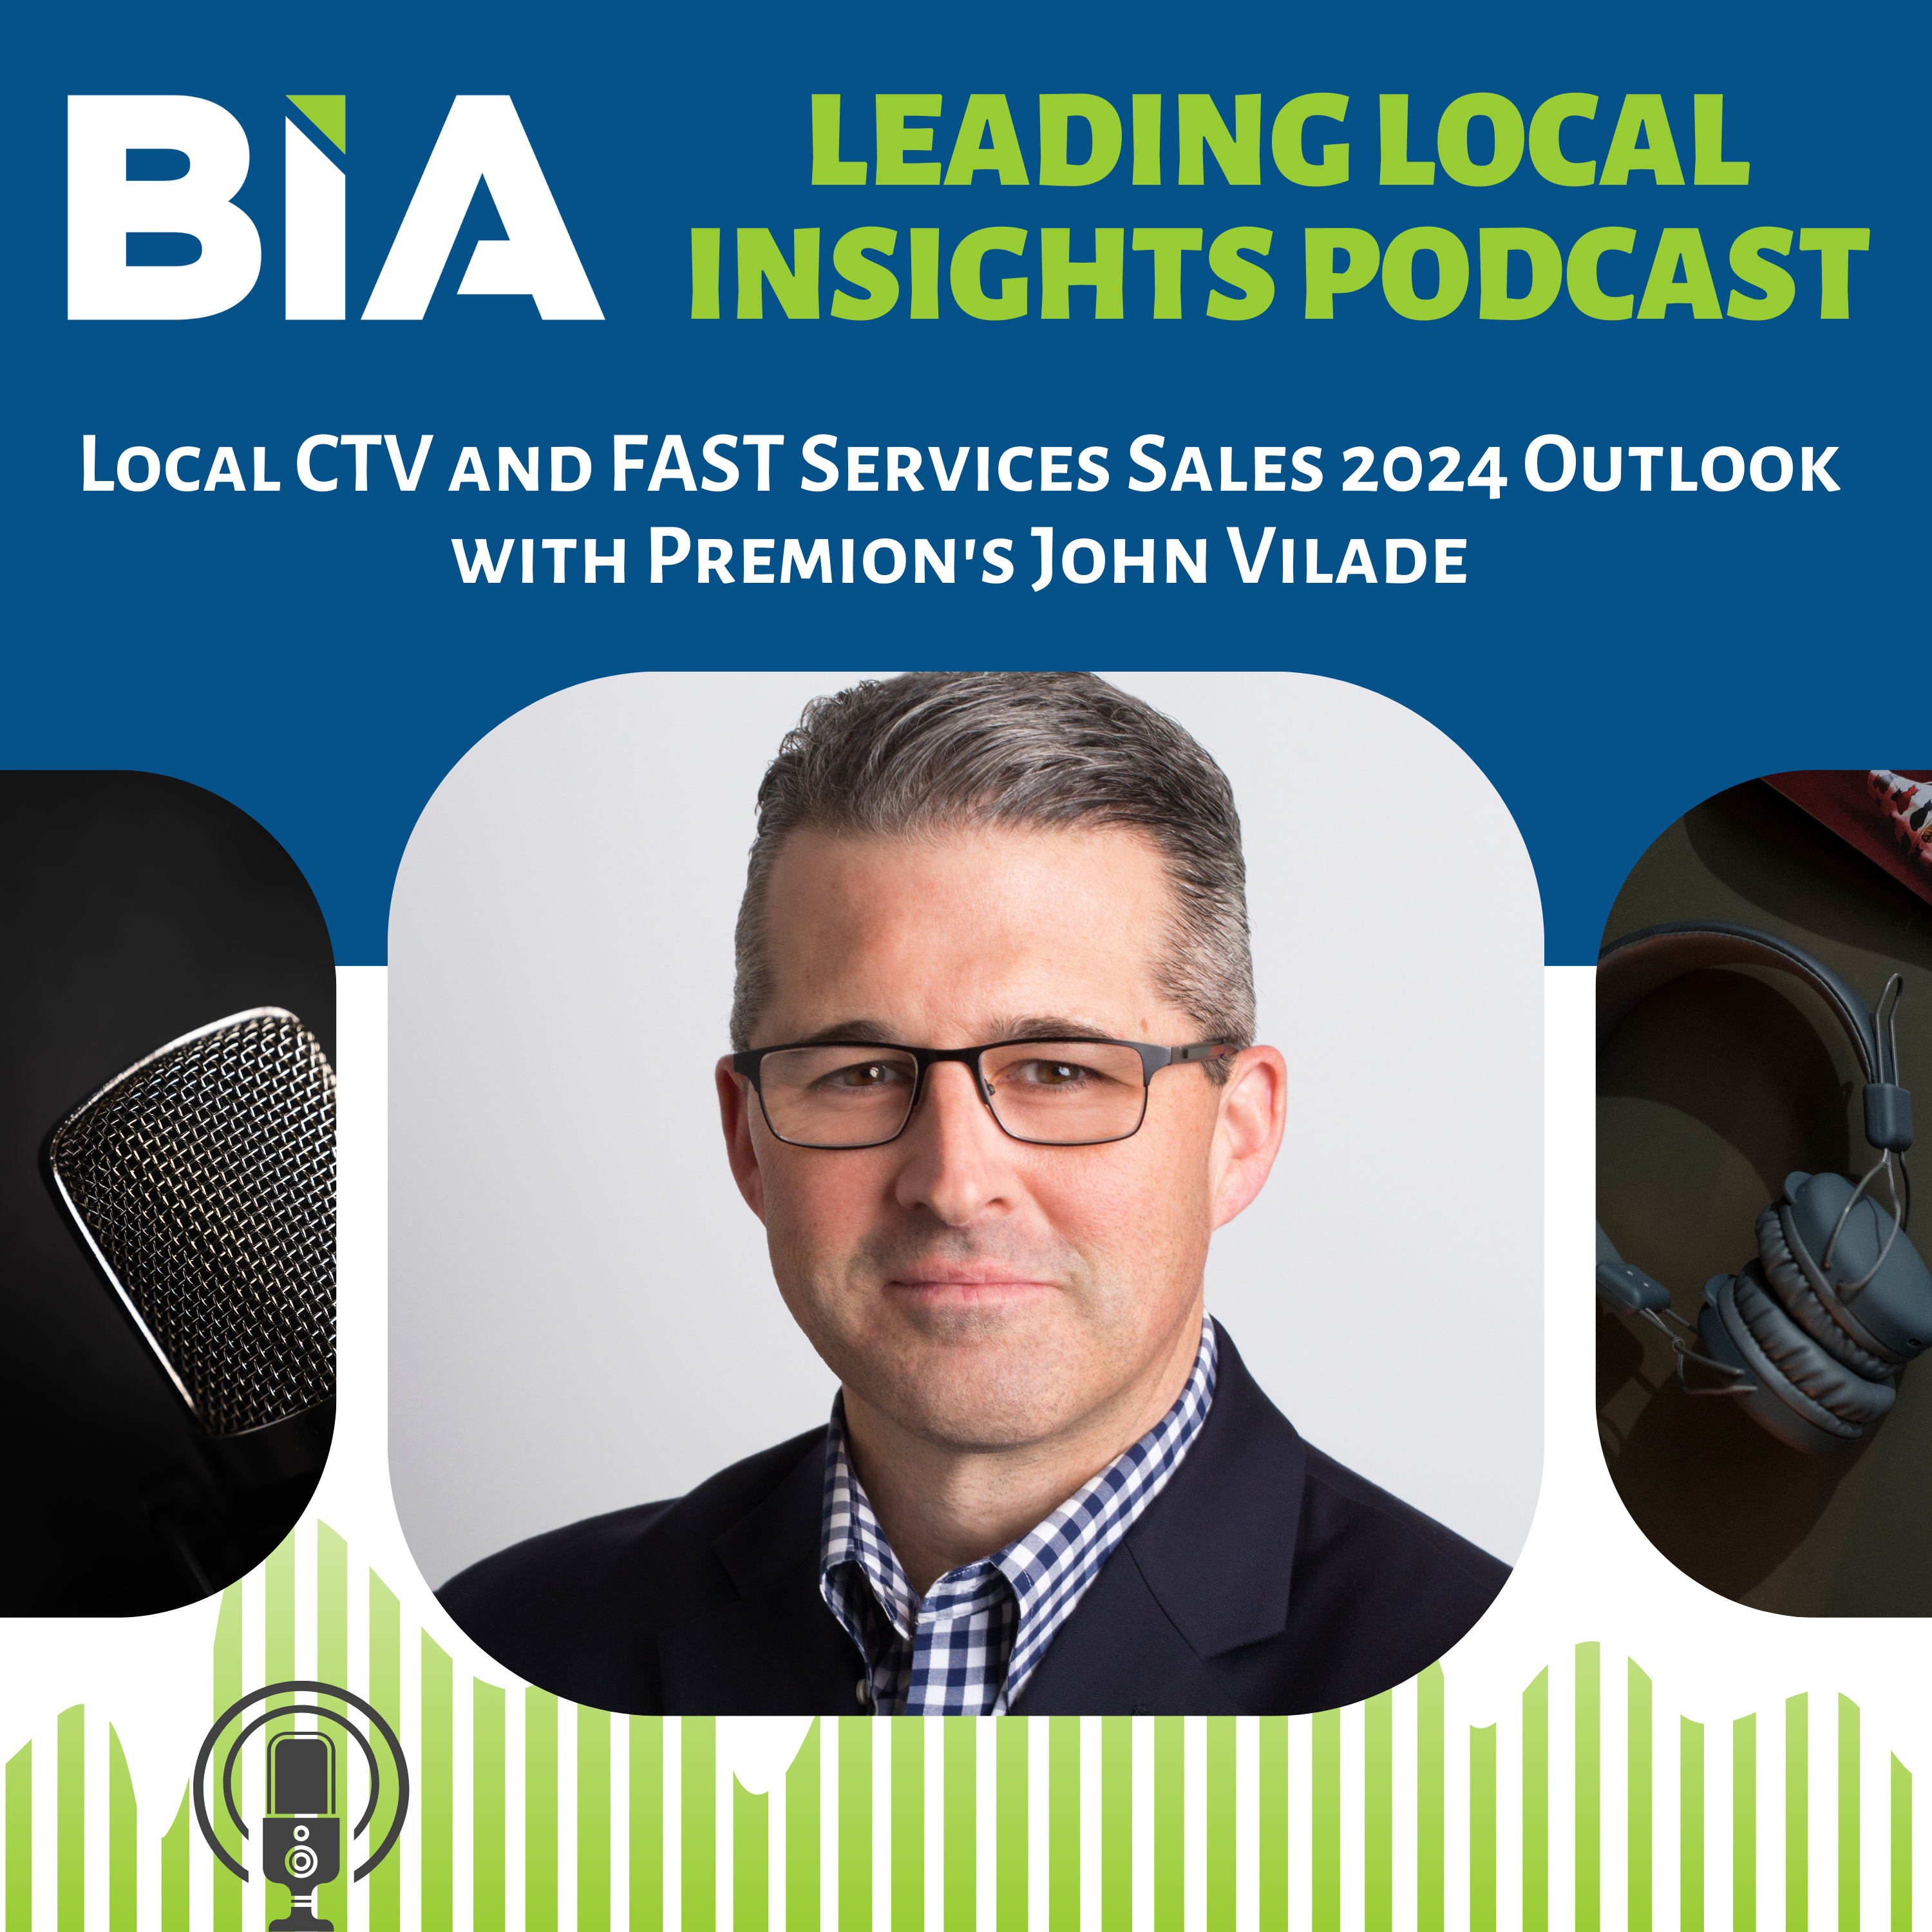 Local CTV and FAST Services Sales 2024 Outlook: Podcast with Premion’s John Vilade